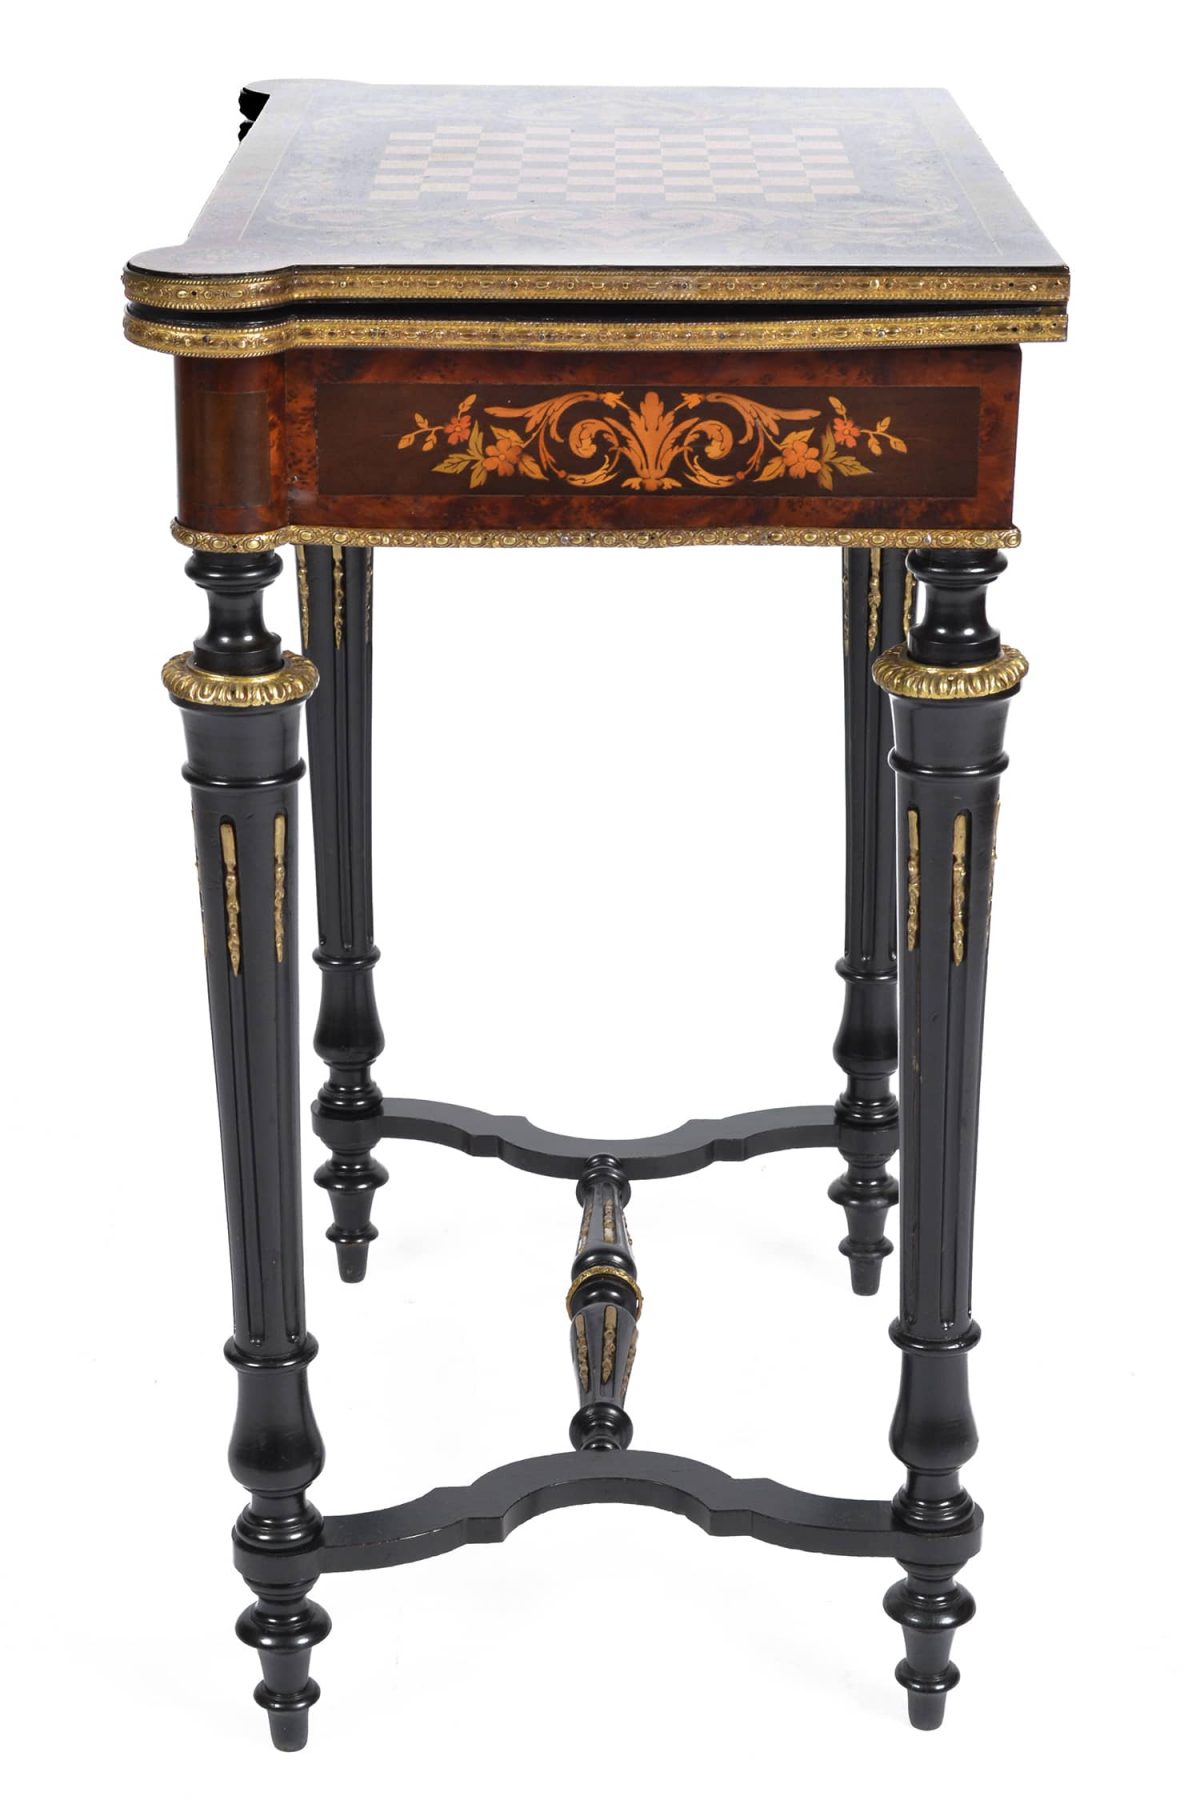 FRENCH 19TH CENTURY LOUIS PHILLIPHE INLAID GAME / SIDE TABLE